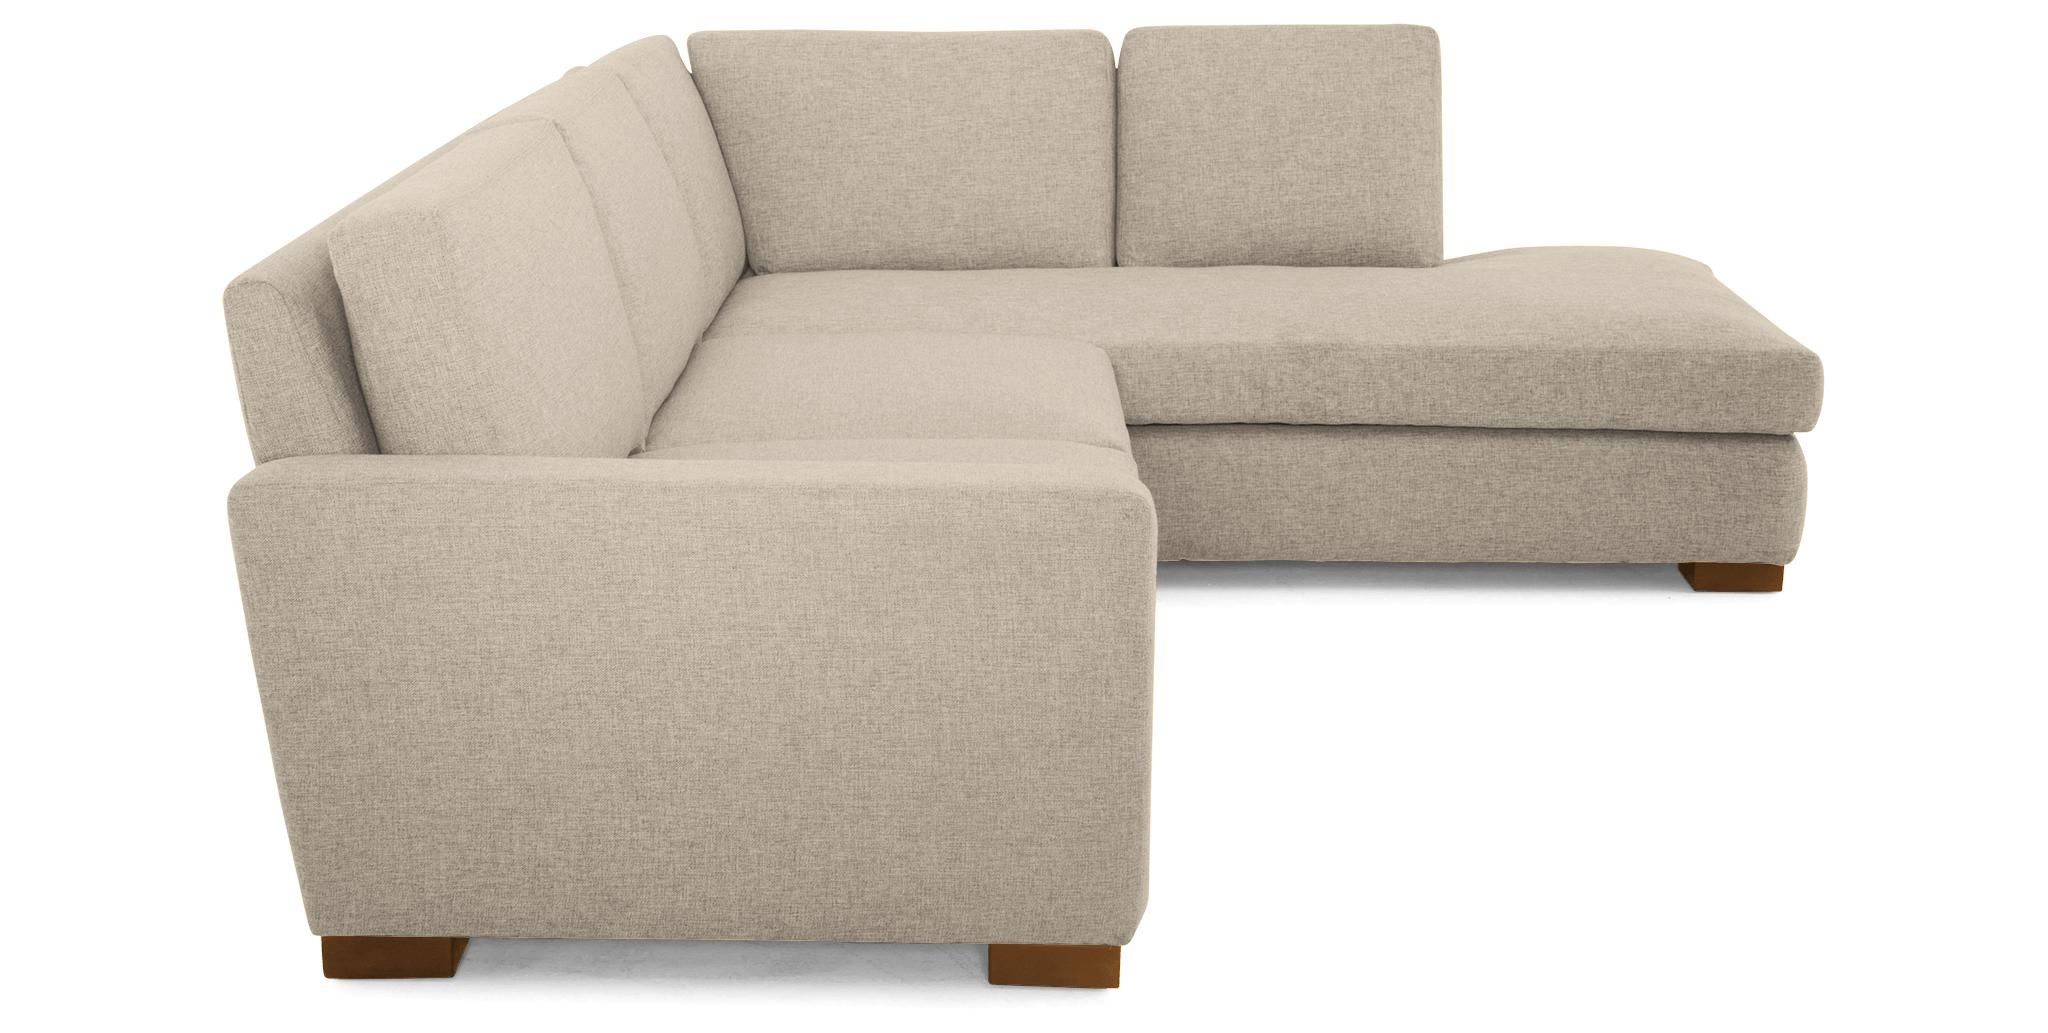 Beige/White Anton Mid Century Modern Sectional with Bumper - Cody Sandstone - Mocha - Right  - Image 2